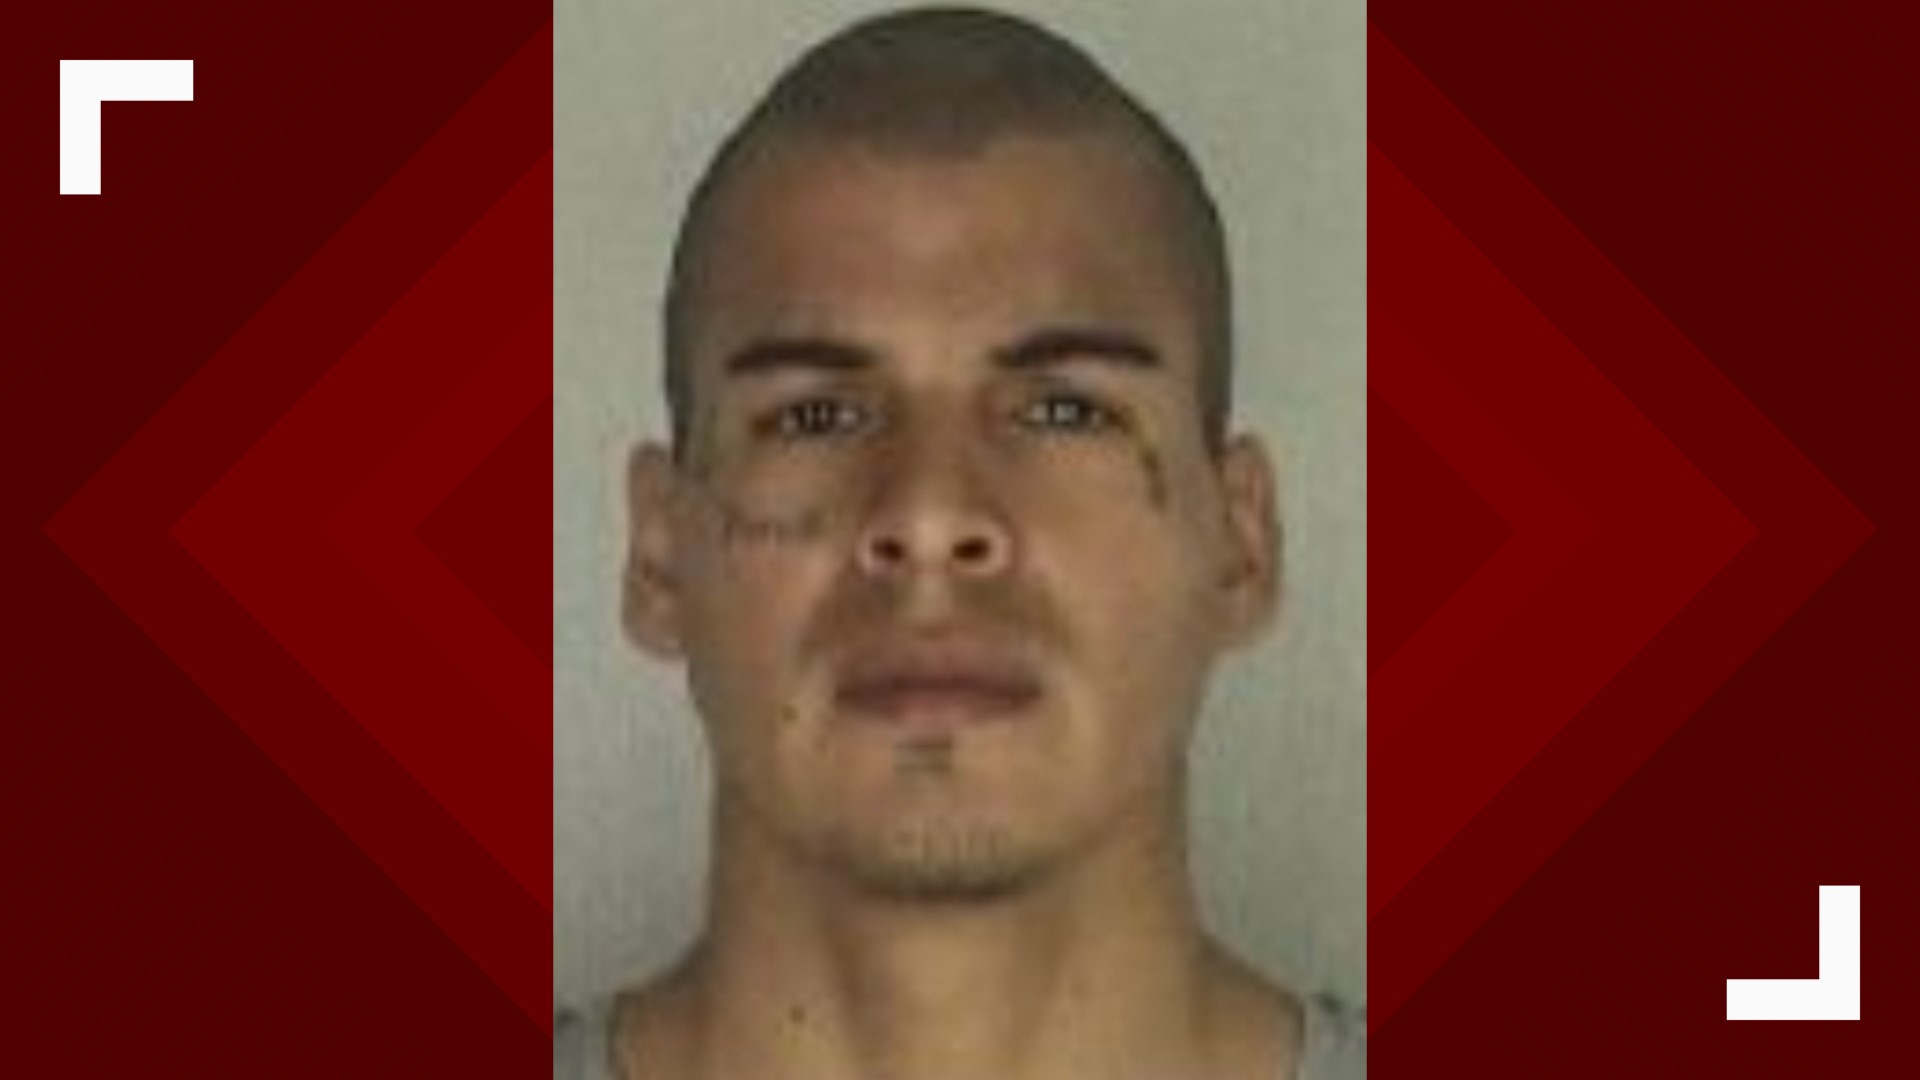 The U.S. Marshals Task Force is asking for your help to find a suspect in Corpus Christi.